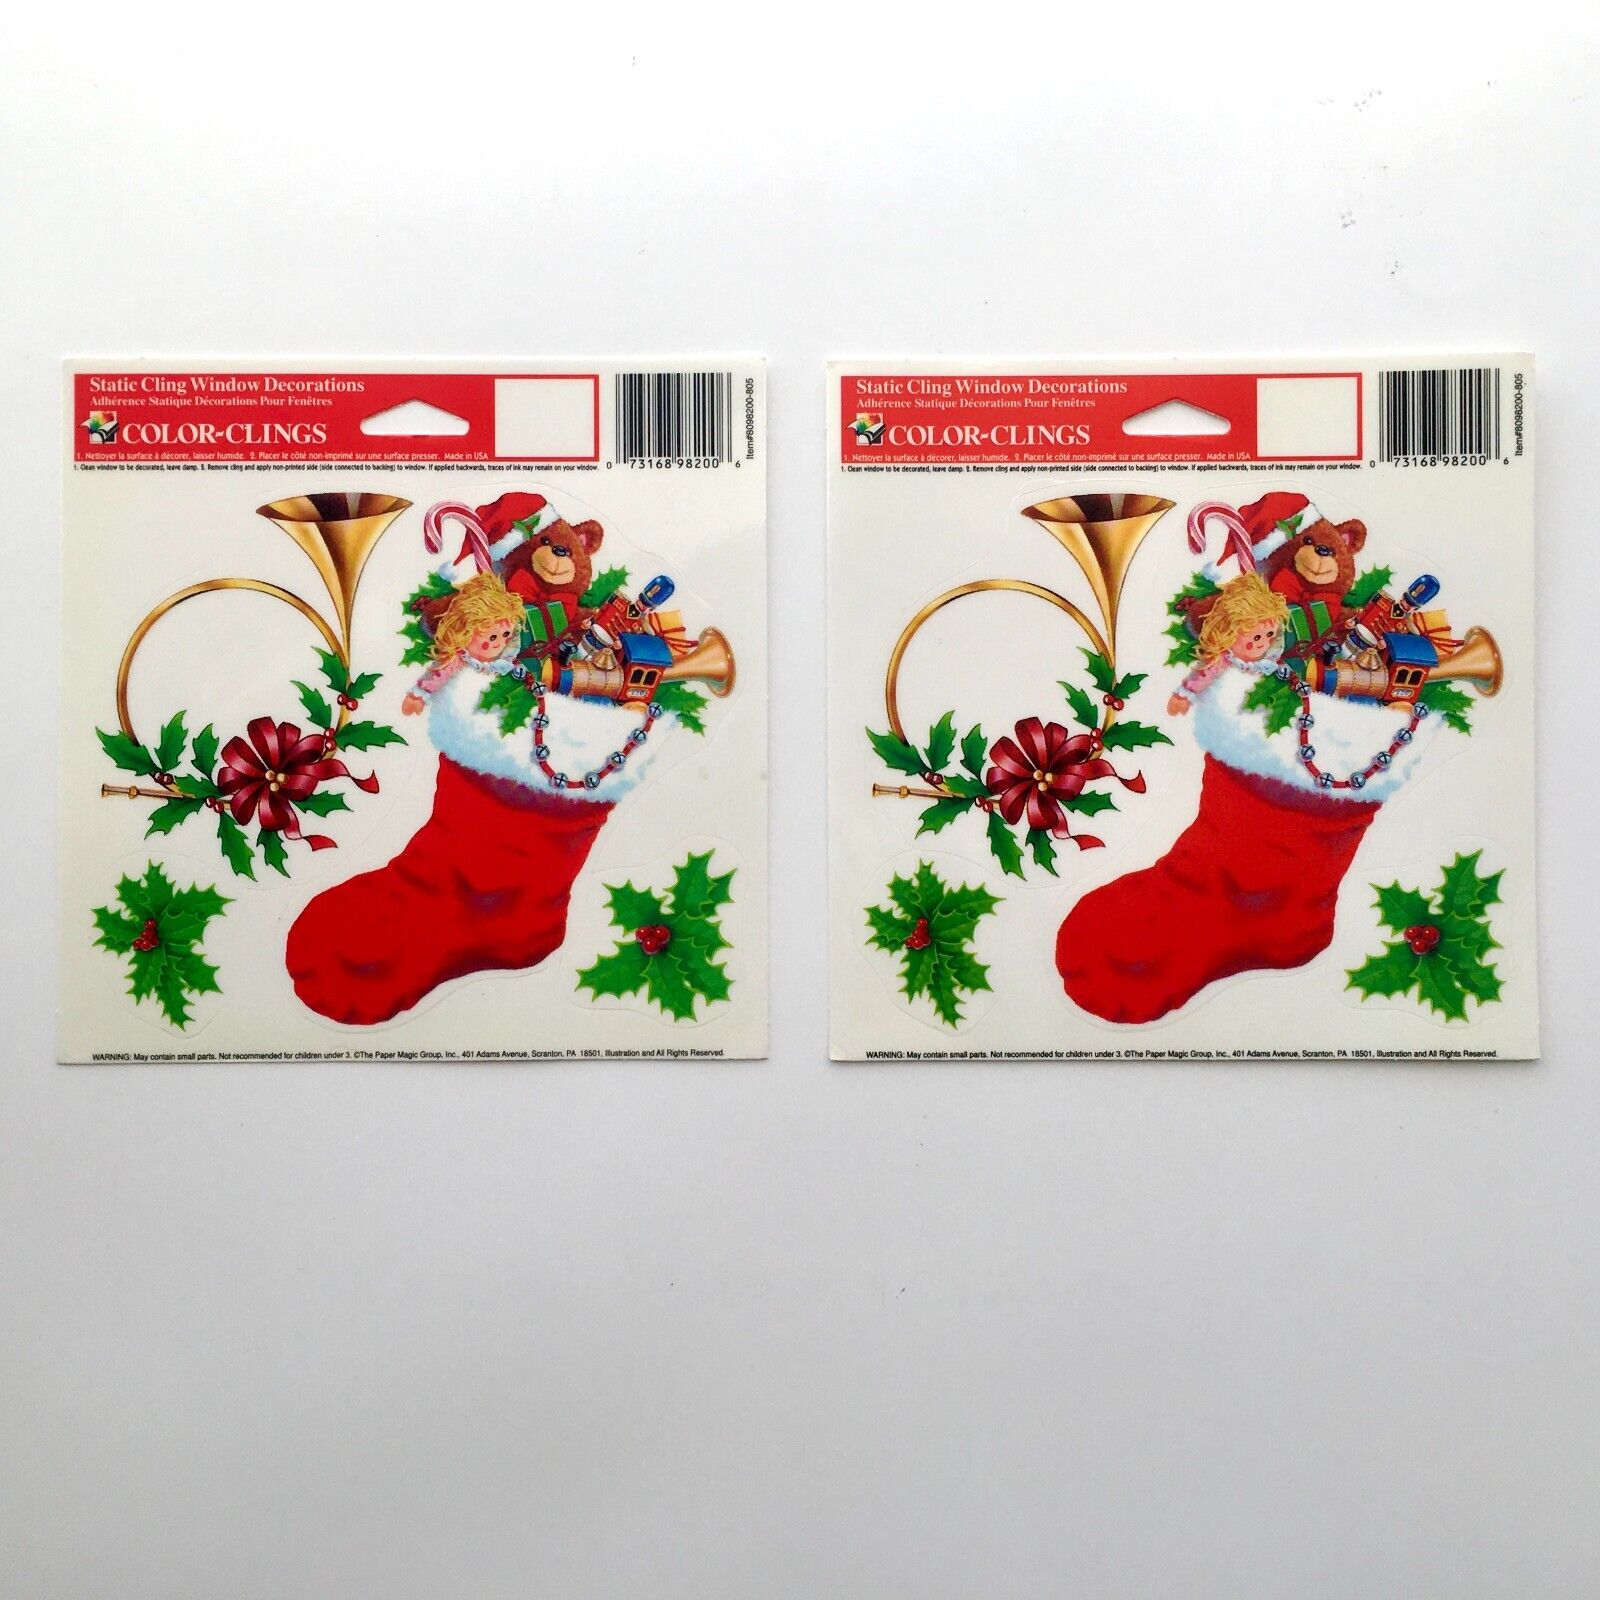 2x VTG Color-Clings Christmas Window Decorations Stockings Toys Horn Paper Holly